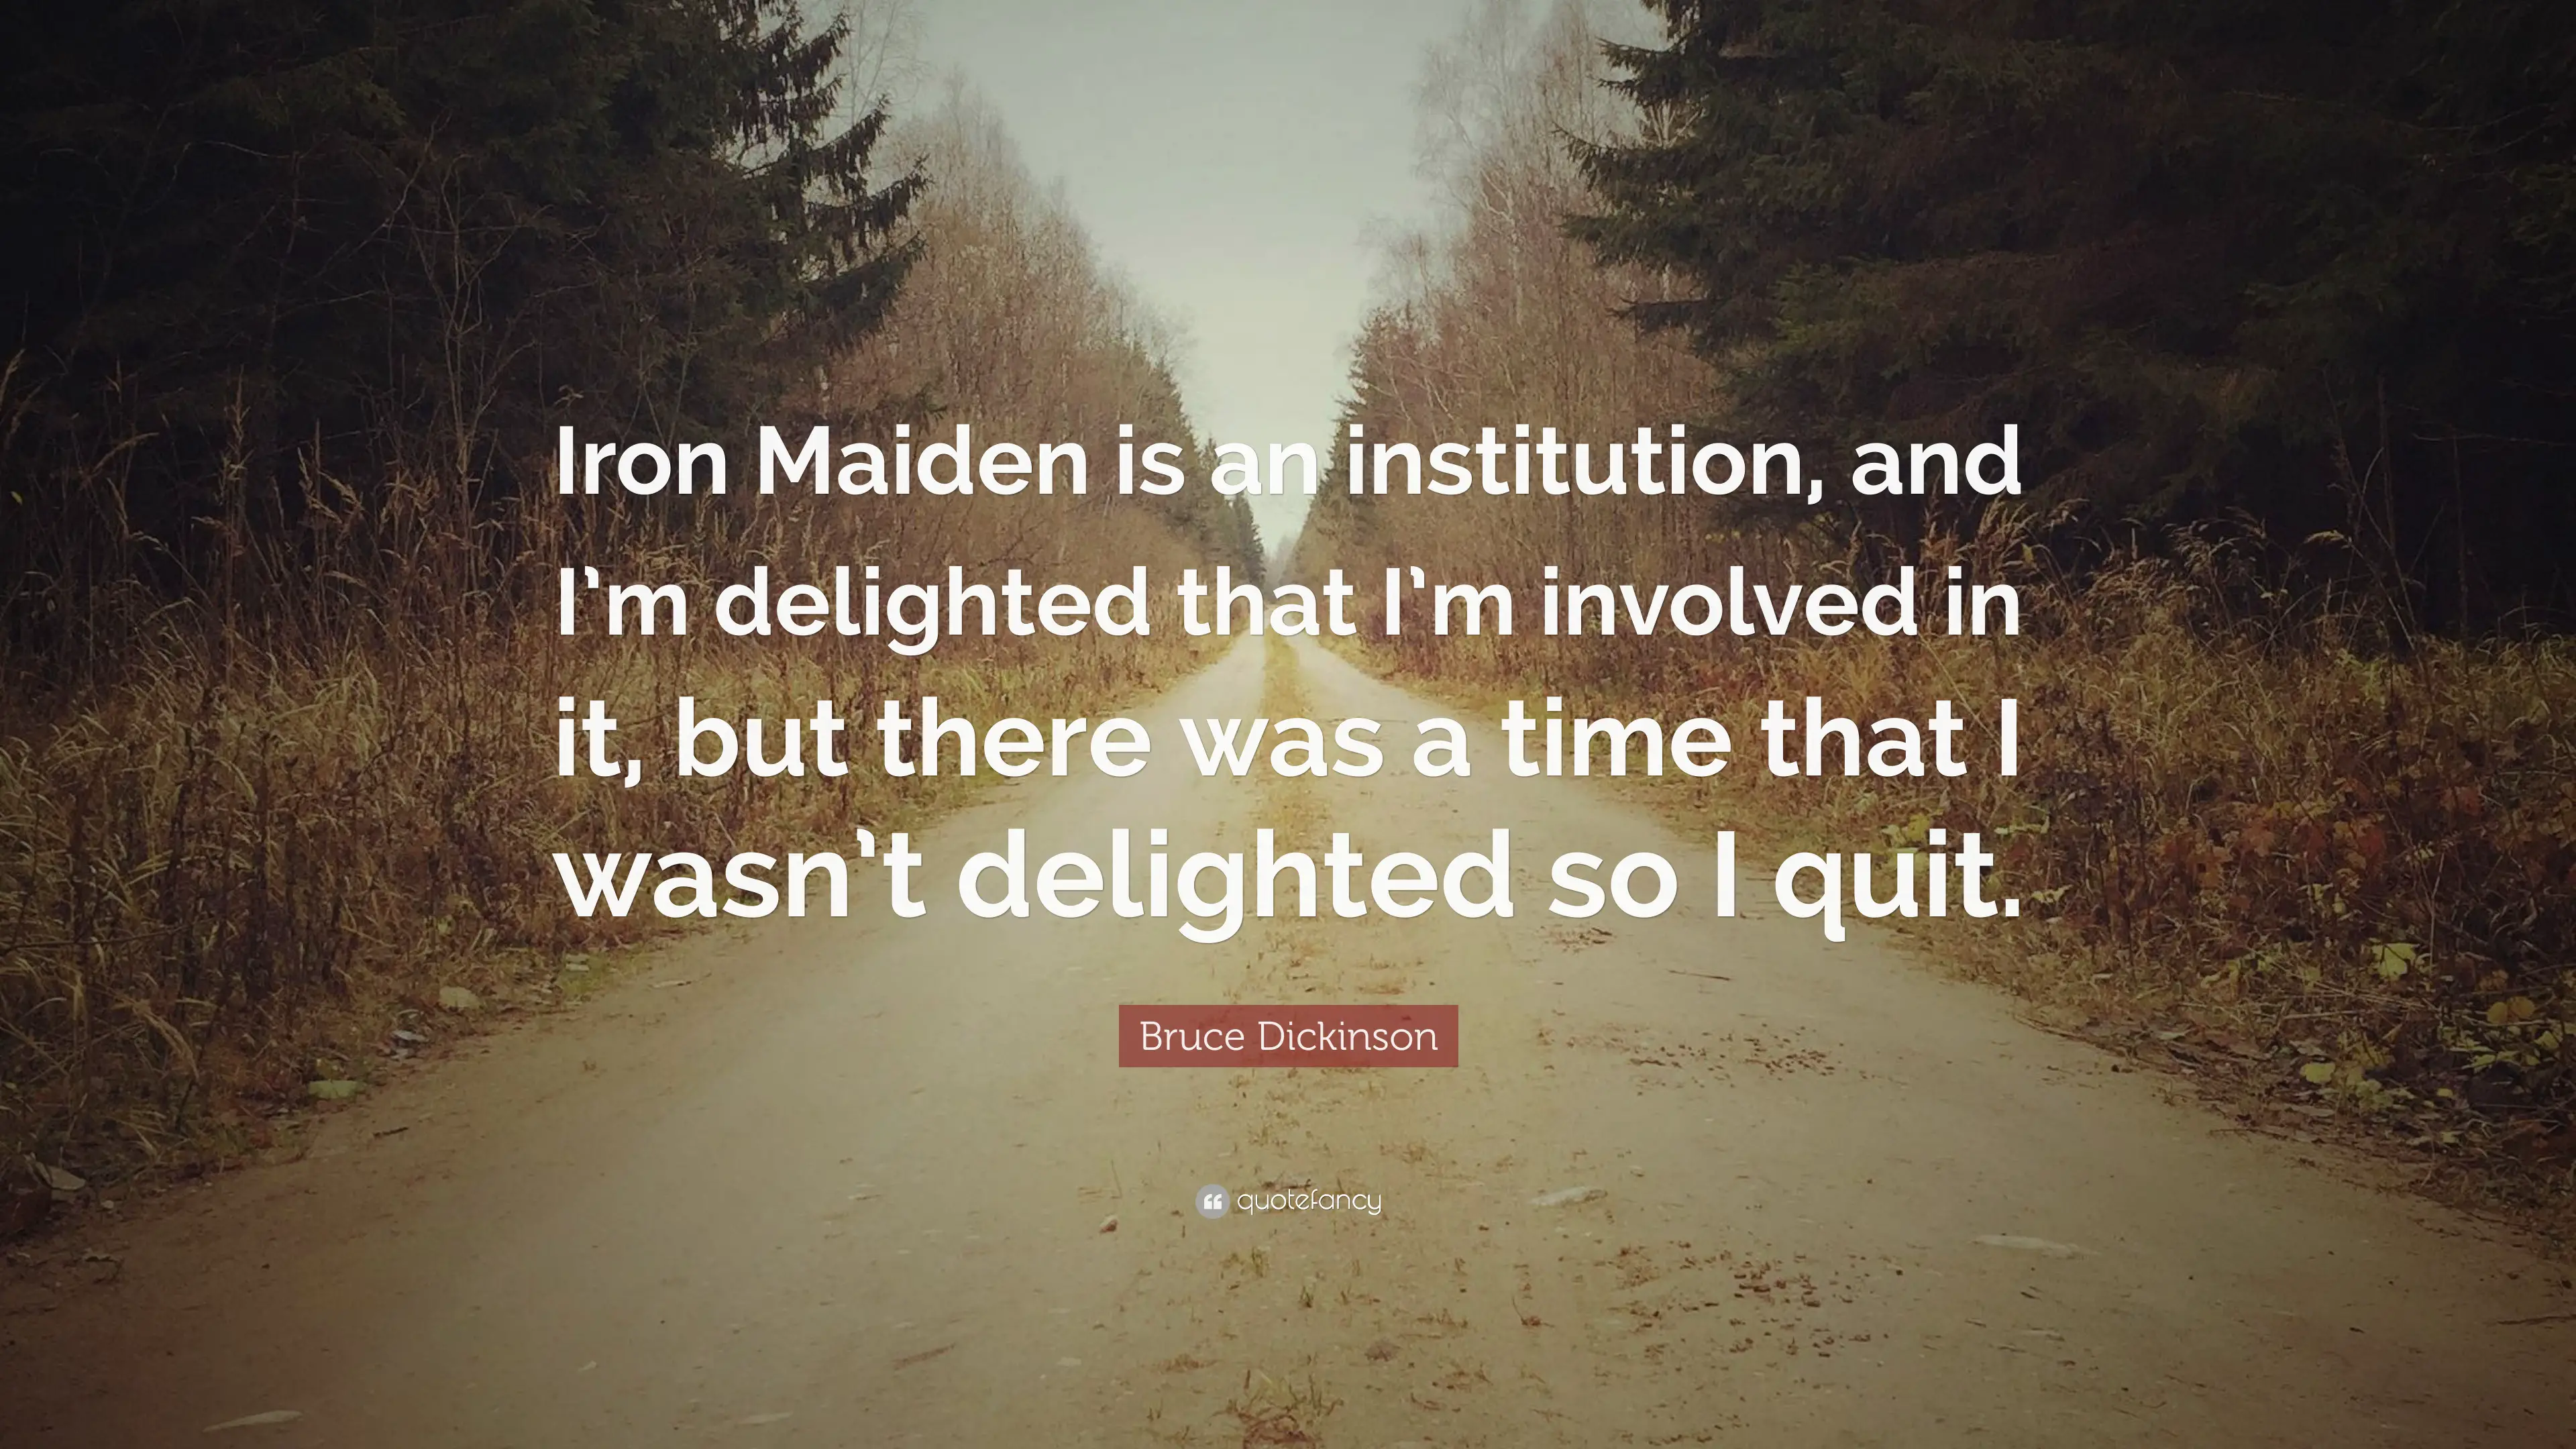 5 Bruce Dickinson Quotes About Iron Maiden